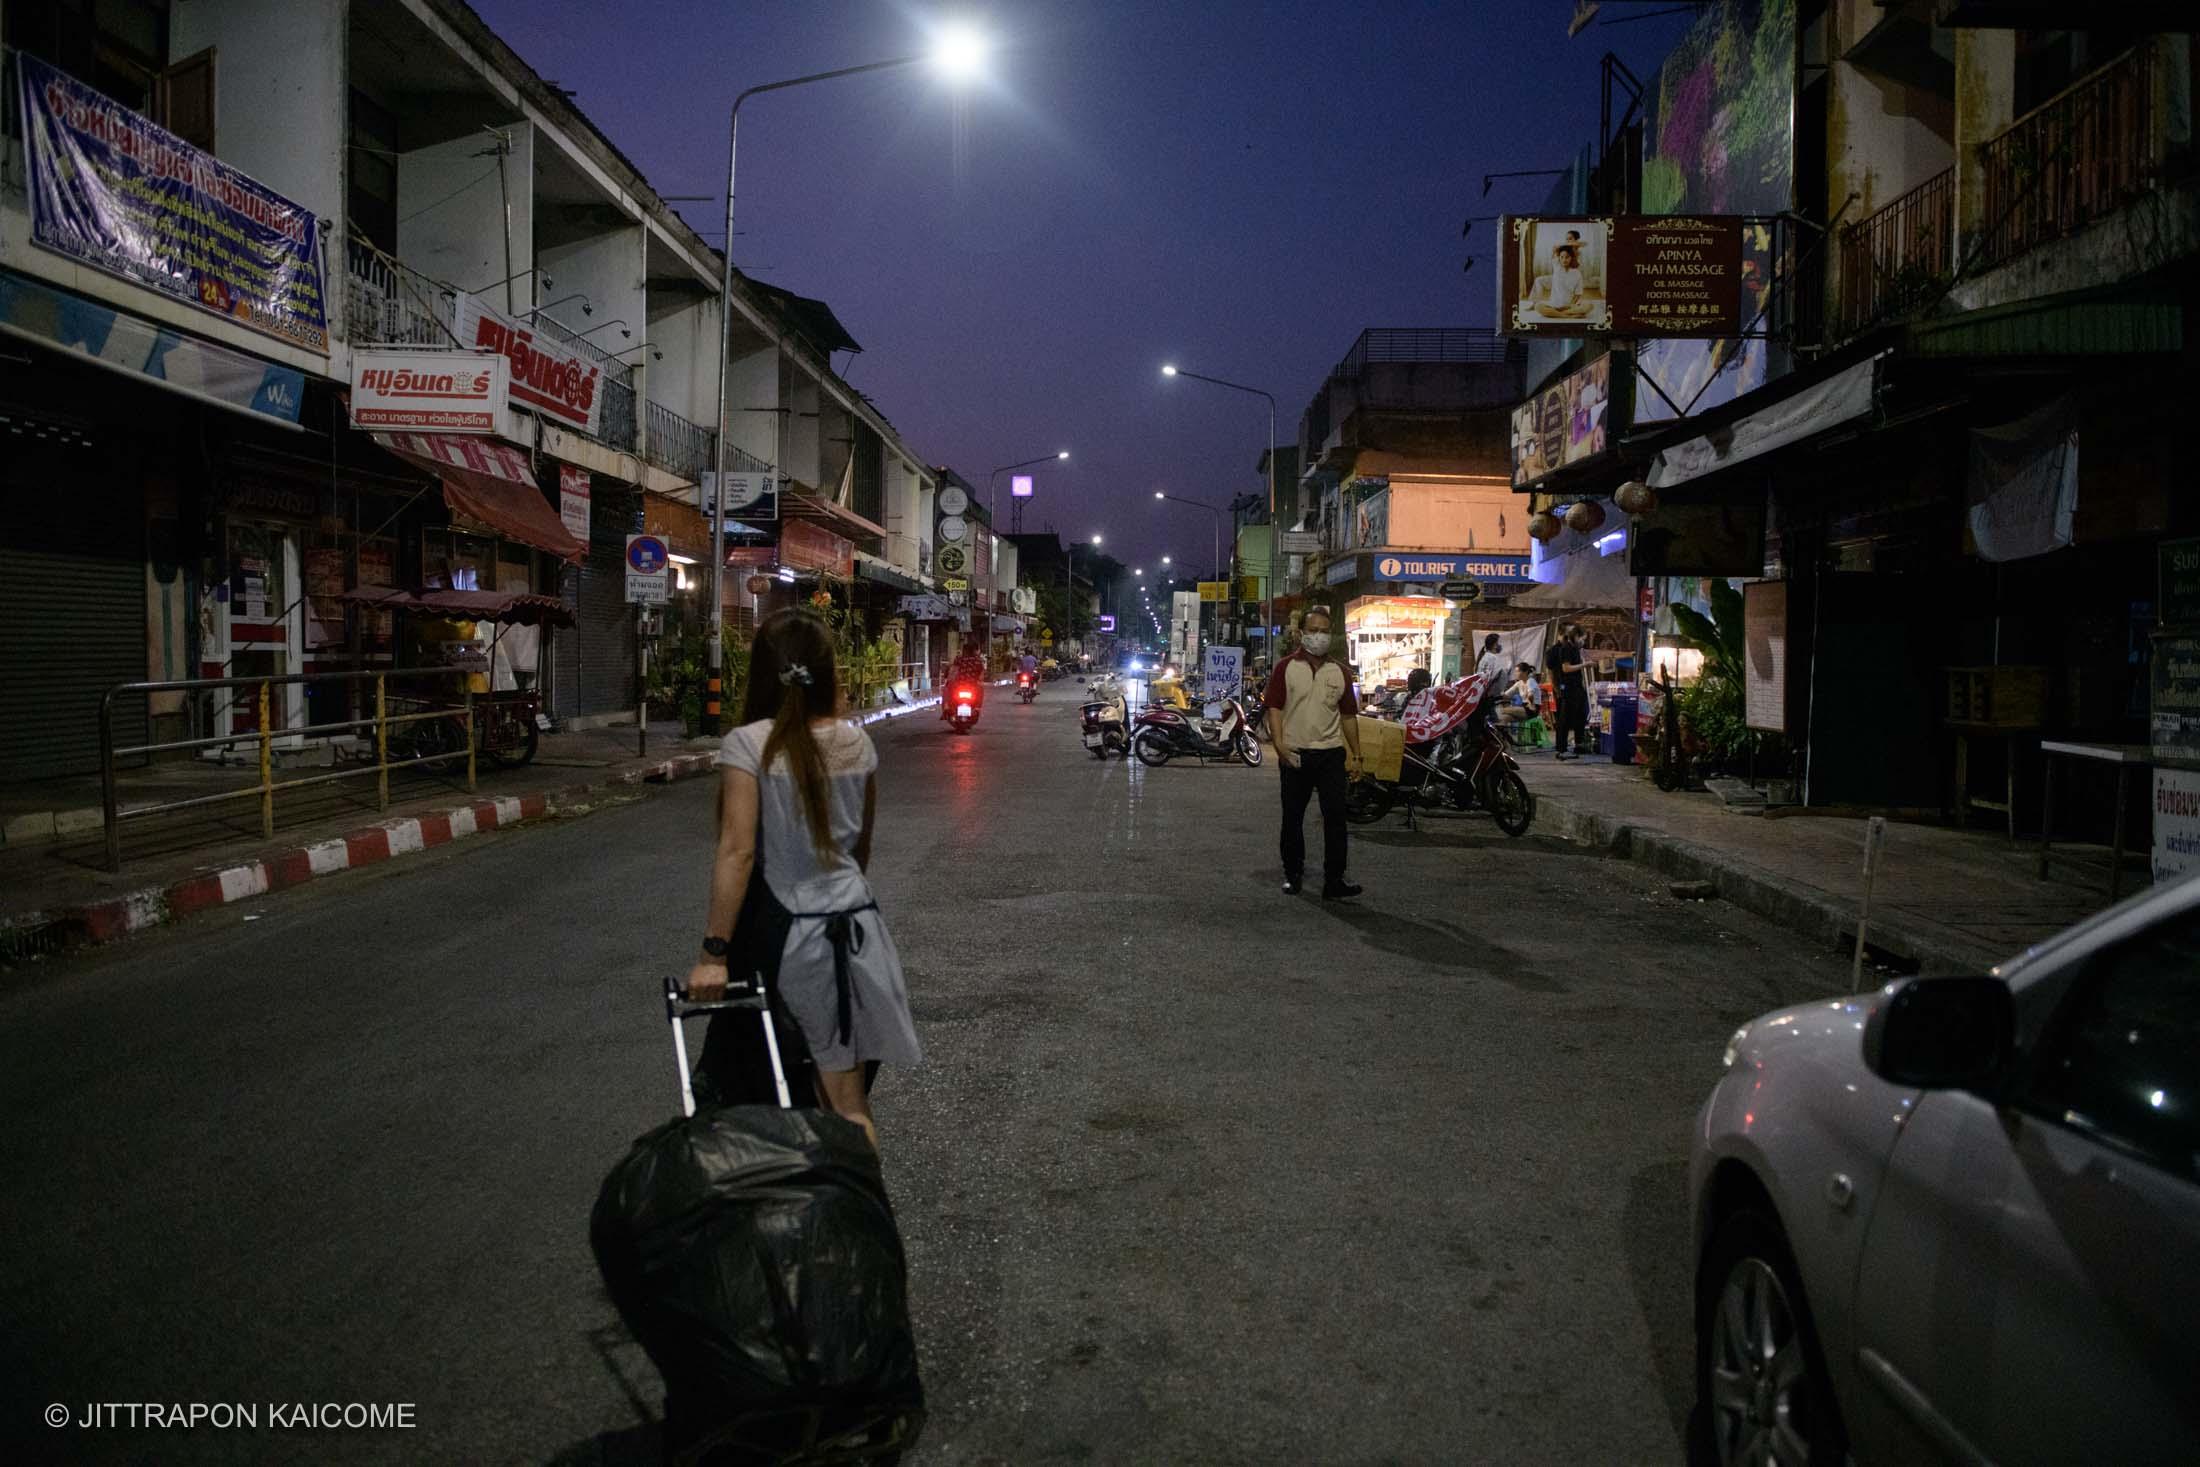 Chiang Mai During Covid-19 - 07.15 PM - Silence on the Streets inside the square of...